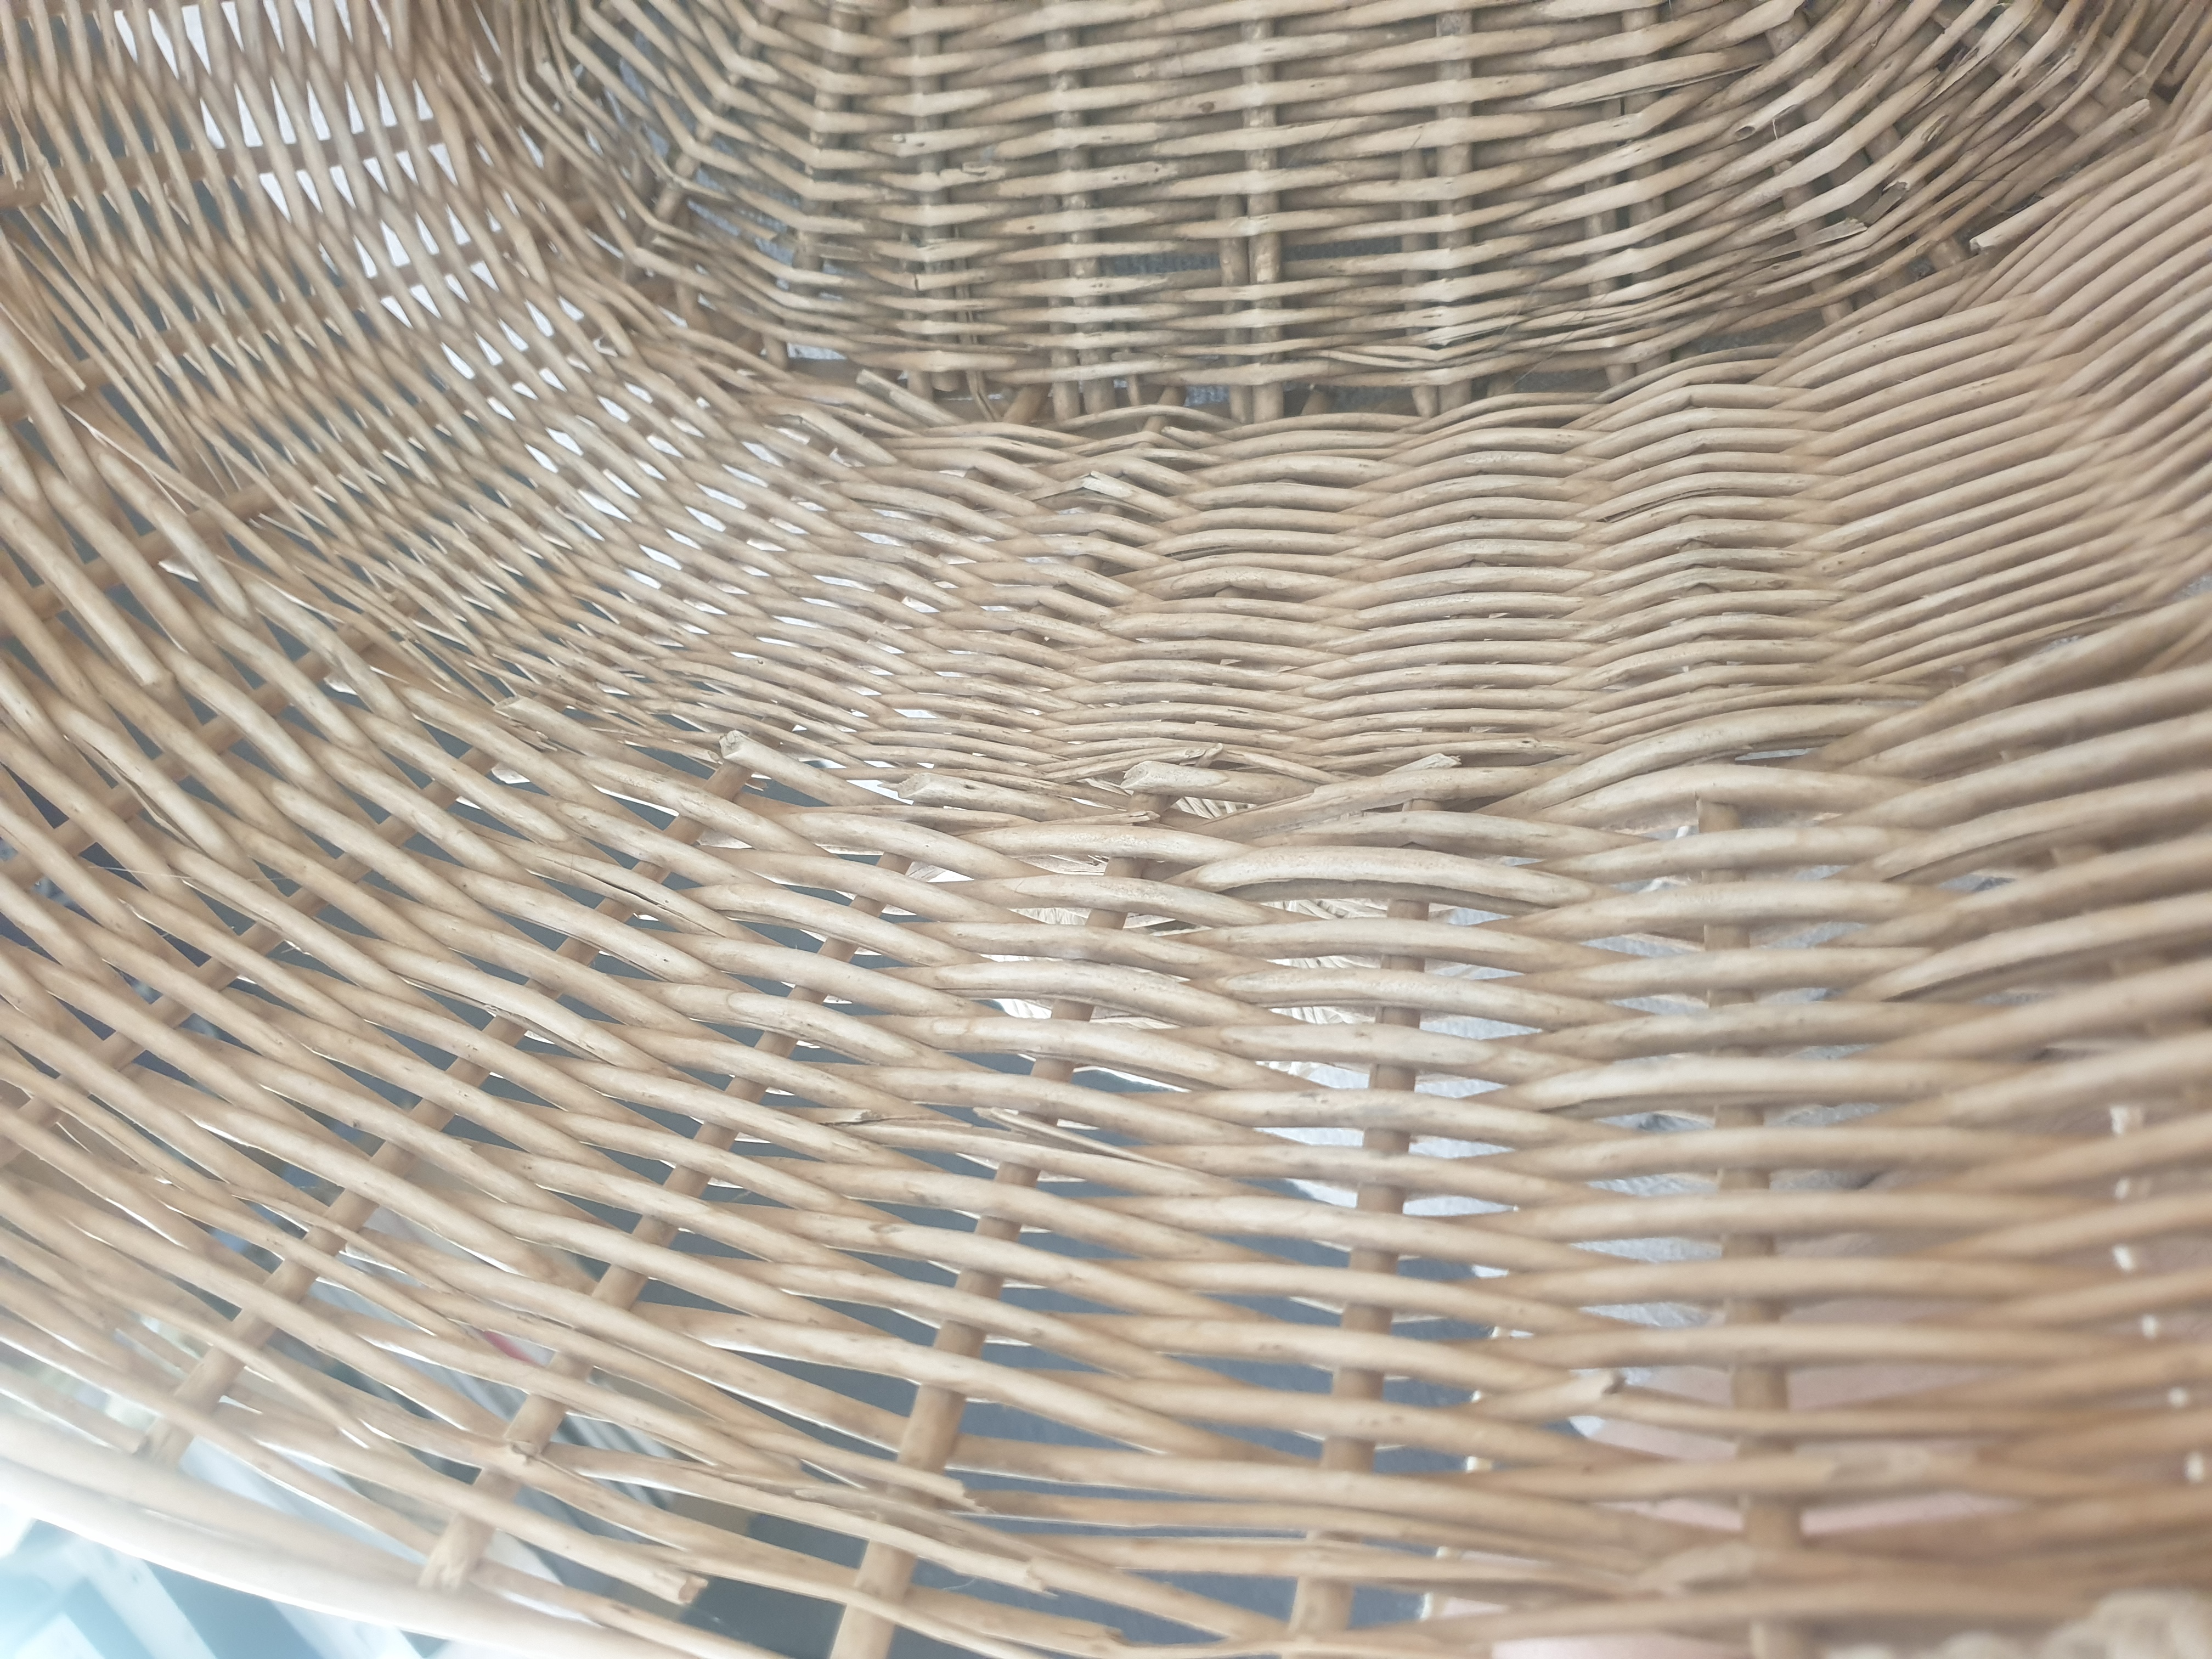 Close up on the inside of a wicker basket which looks damaged around the top edge. There are no visible handles.